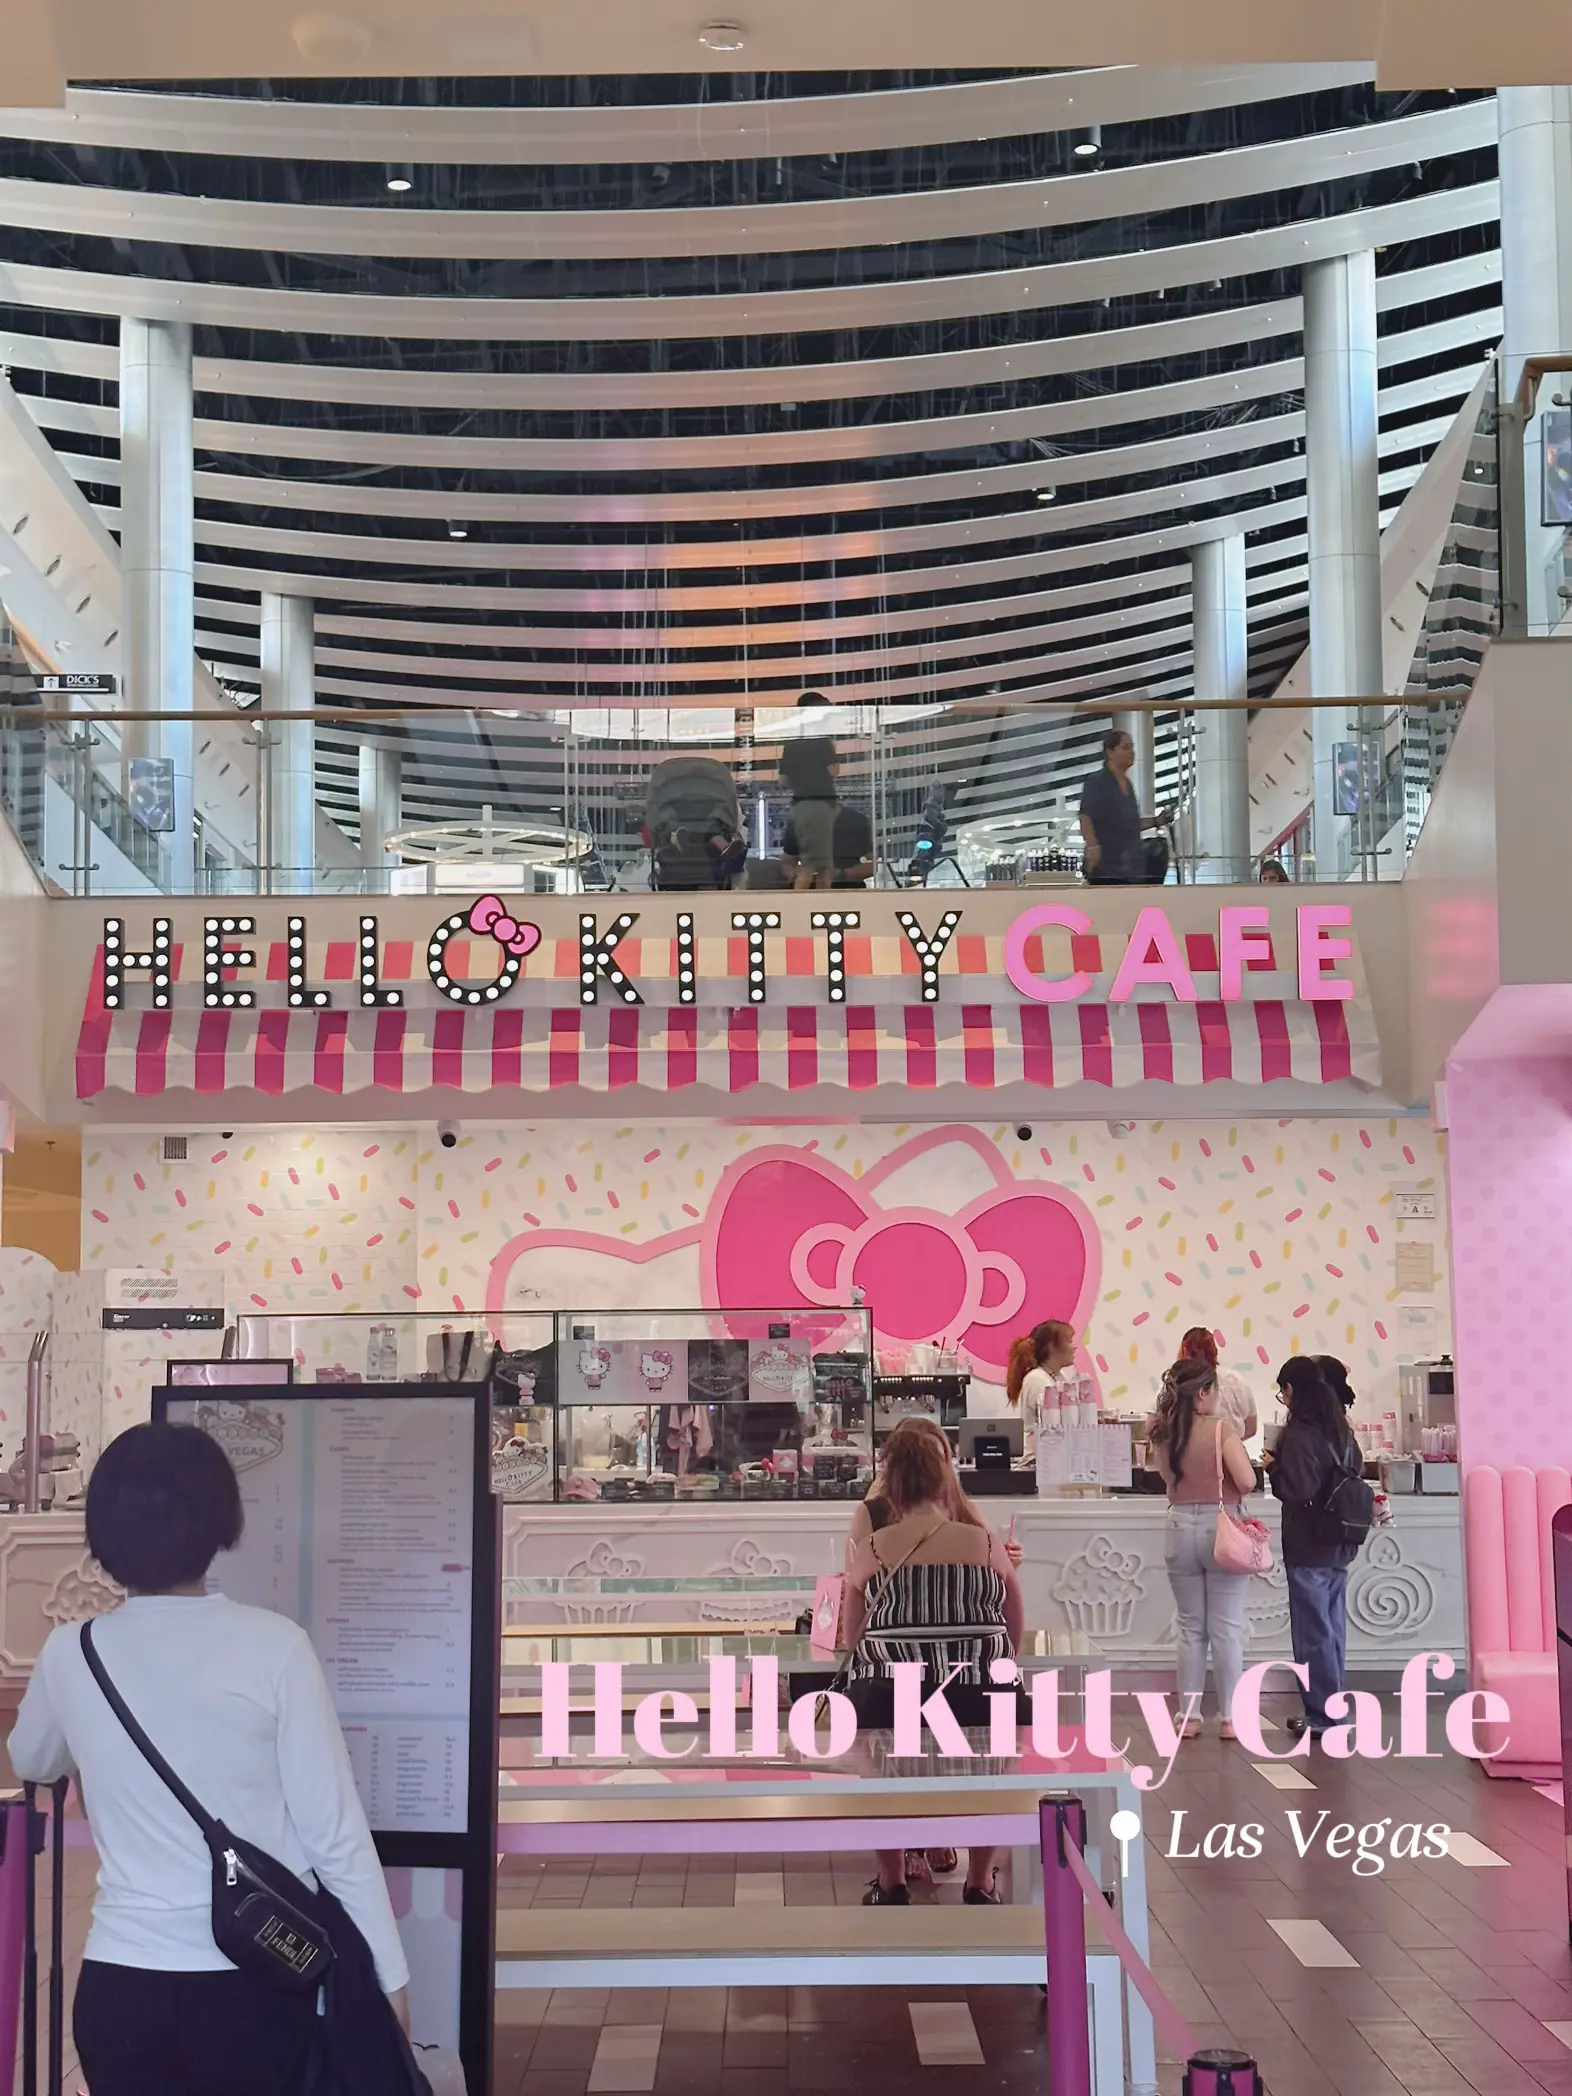 Hello Kitty Cafe Las Vegas - What a delightful photo from the